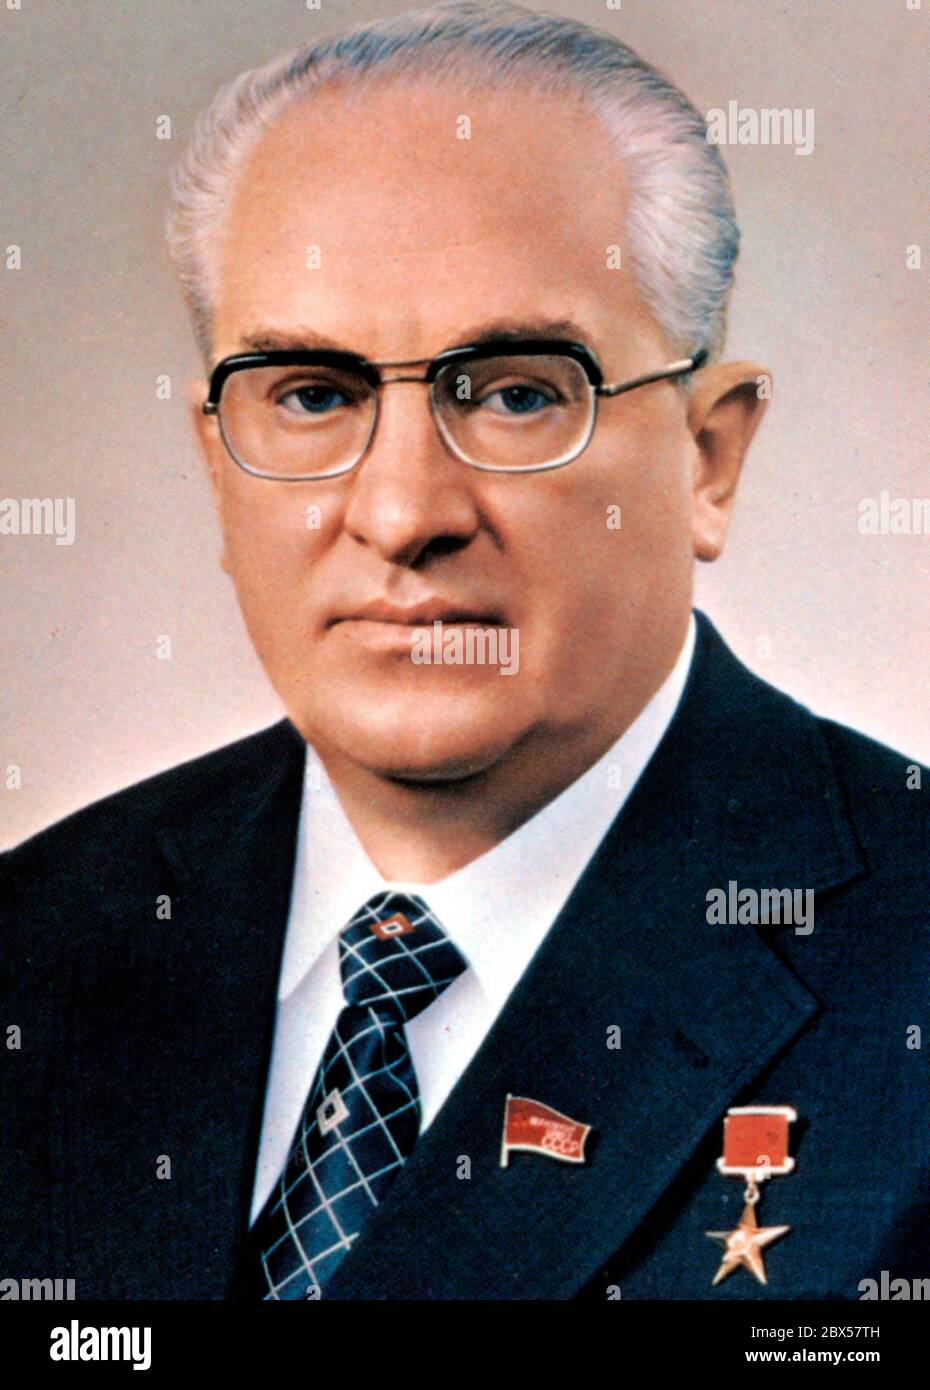 Yuri Andropov (15.06.1914 - 09.02.1984), between 1973 - 1984 Member of the Political Bureau of the CPSU, between 1982 - 1984 Secretary General of the CPSU, between 1967 - 1982 head of the KGB secret service, successor of the Soviet party leader Brezhnev, who awarded him the Order of Lenin for his merits as head of the KGB. Official photo from 1981 for the authorities in the former Soviet Union and for the East German KGB headquarters in the East Berlin district of Karlshorst. Stock Photo